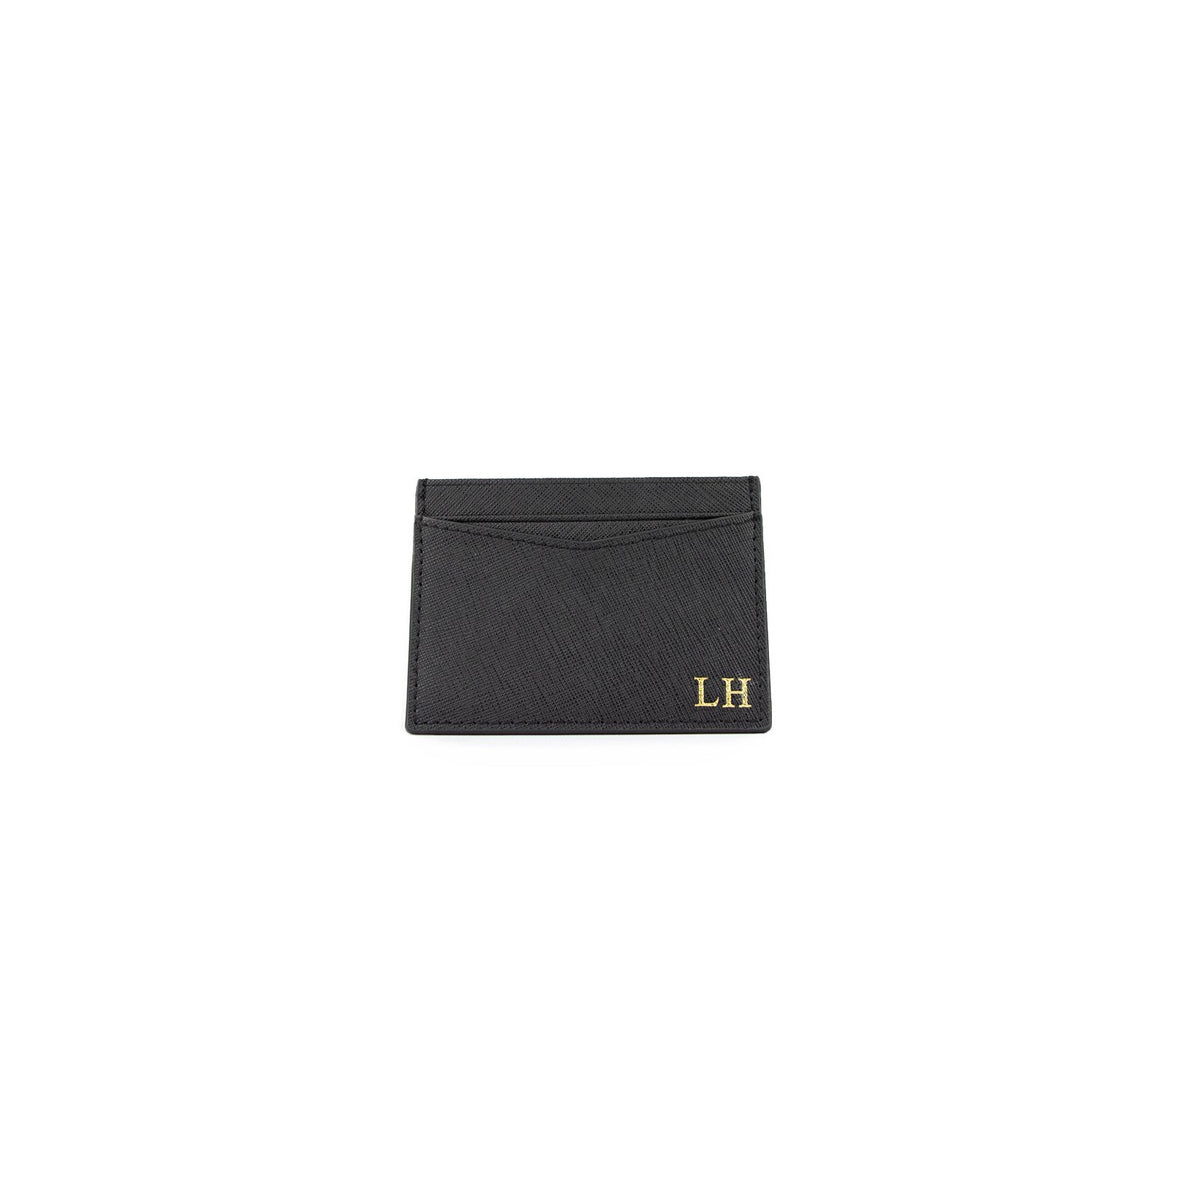 Personalised Black Monogrammed Saffiano Leather Card Holder